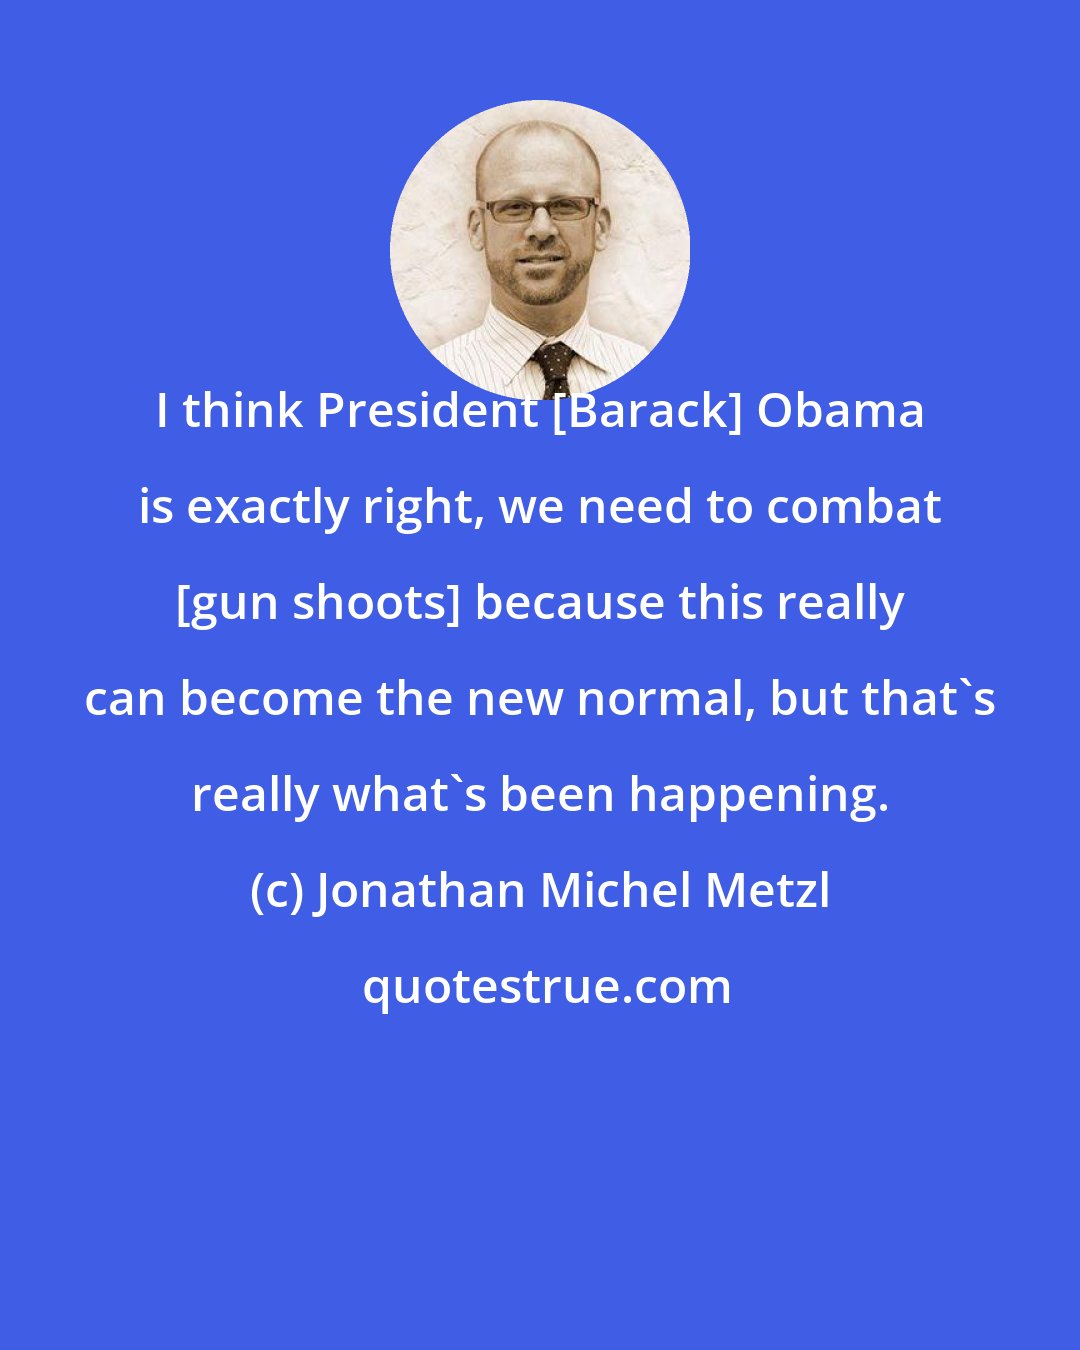 Jonathan Michel Metzl: I think President [Barack] Obama is exactly right, we need to combat [gun shoots] because this really can become the new normal, but that`s really what`s been happening.